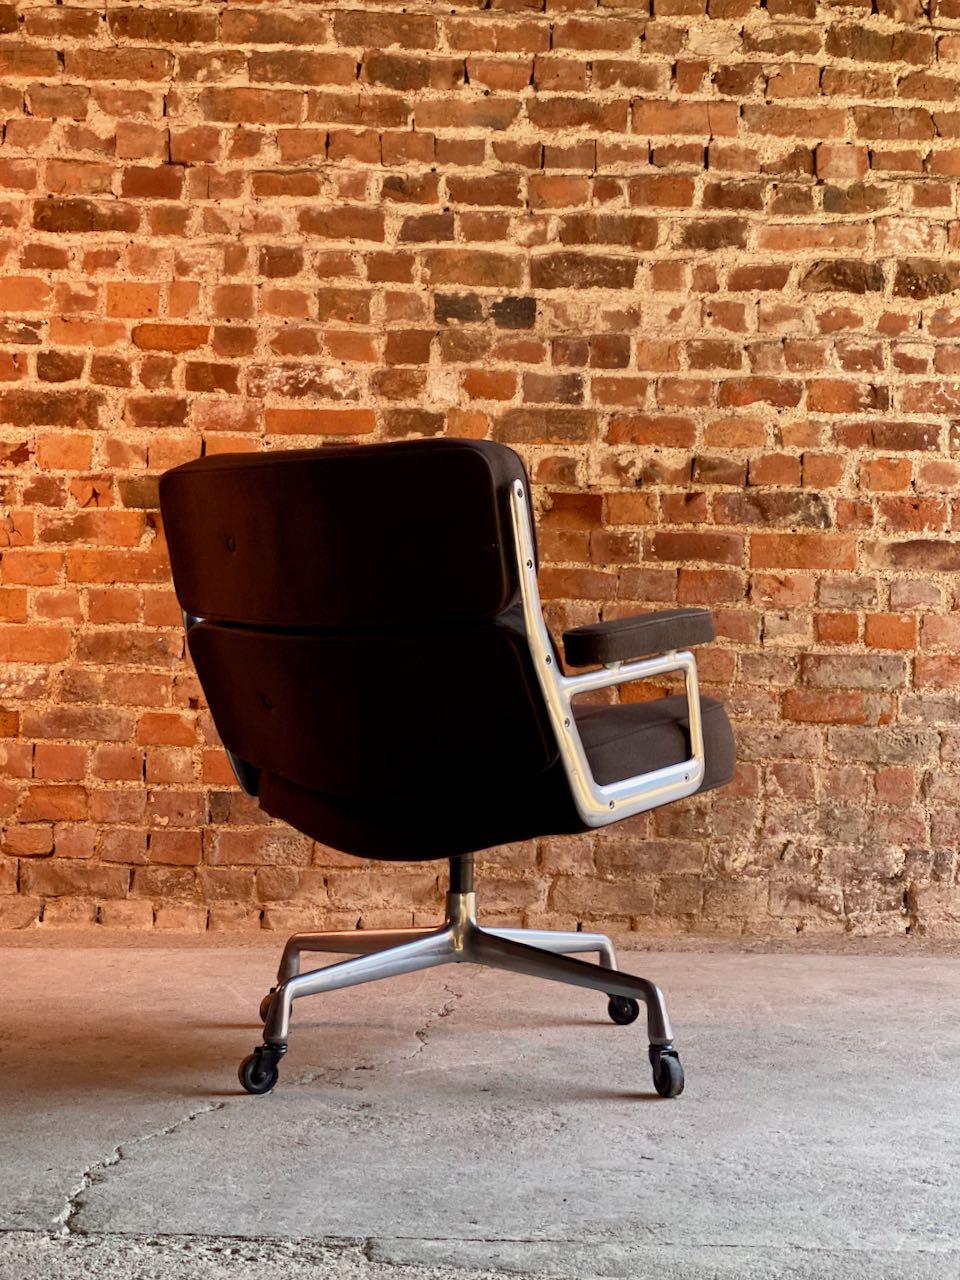 Aluminum Charles & Ray Eames Time Life Lobby Chair by Herman Miller, USA, 1970